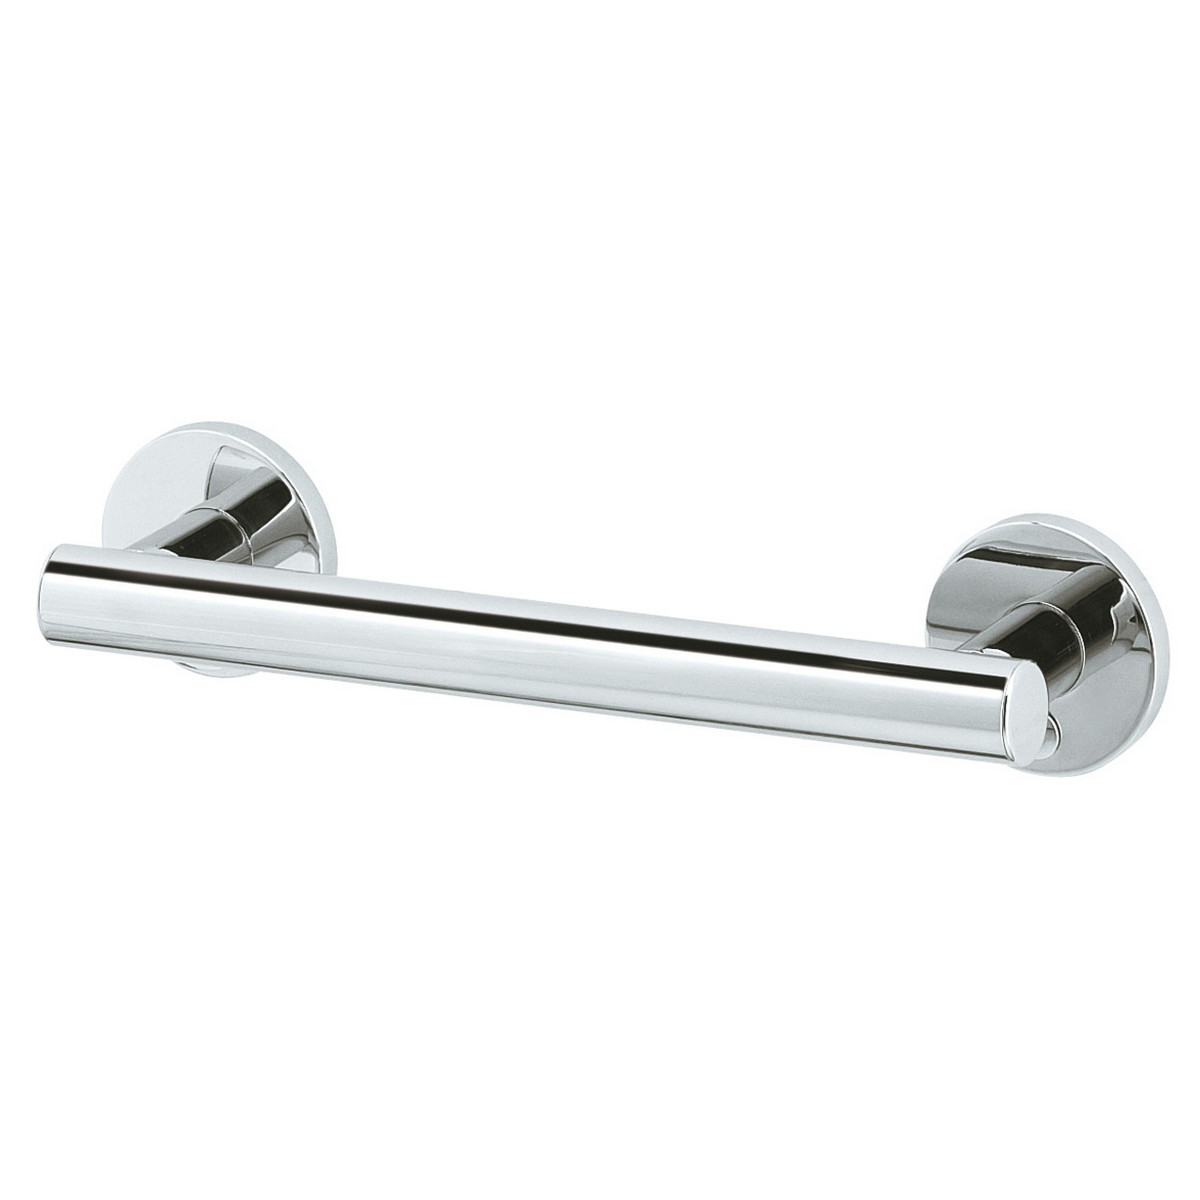 KEUCO 35901013600 PLAN CARE 36 INCH WALL MOUNTED SUPPORT RAIL IN POLISHED CHROME